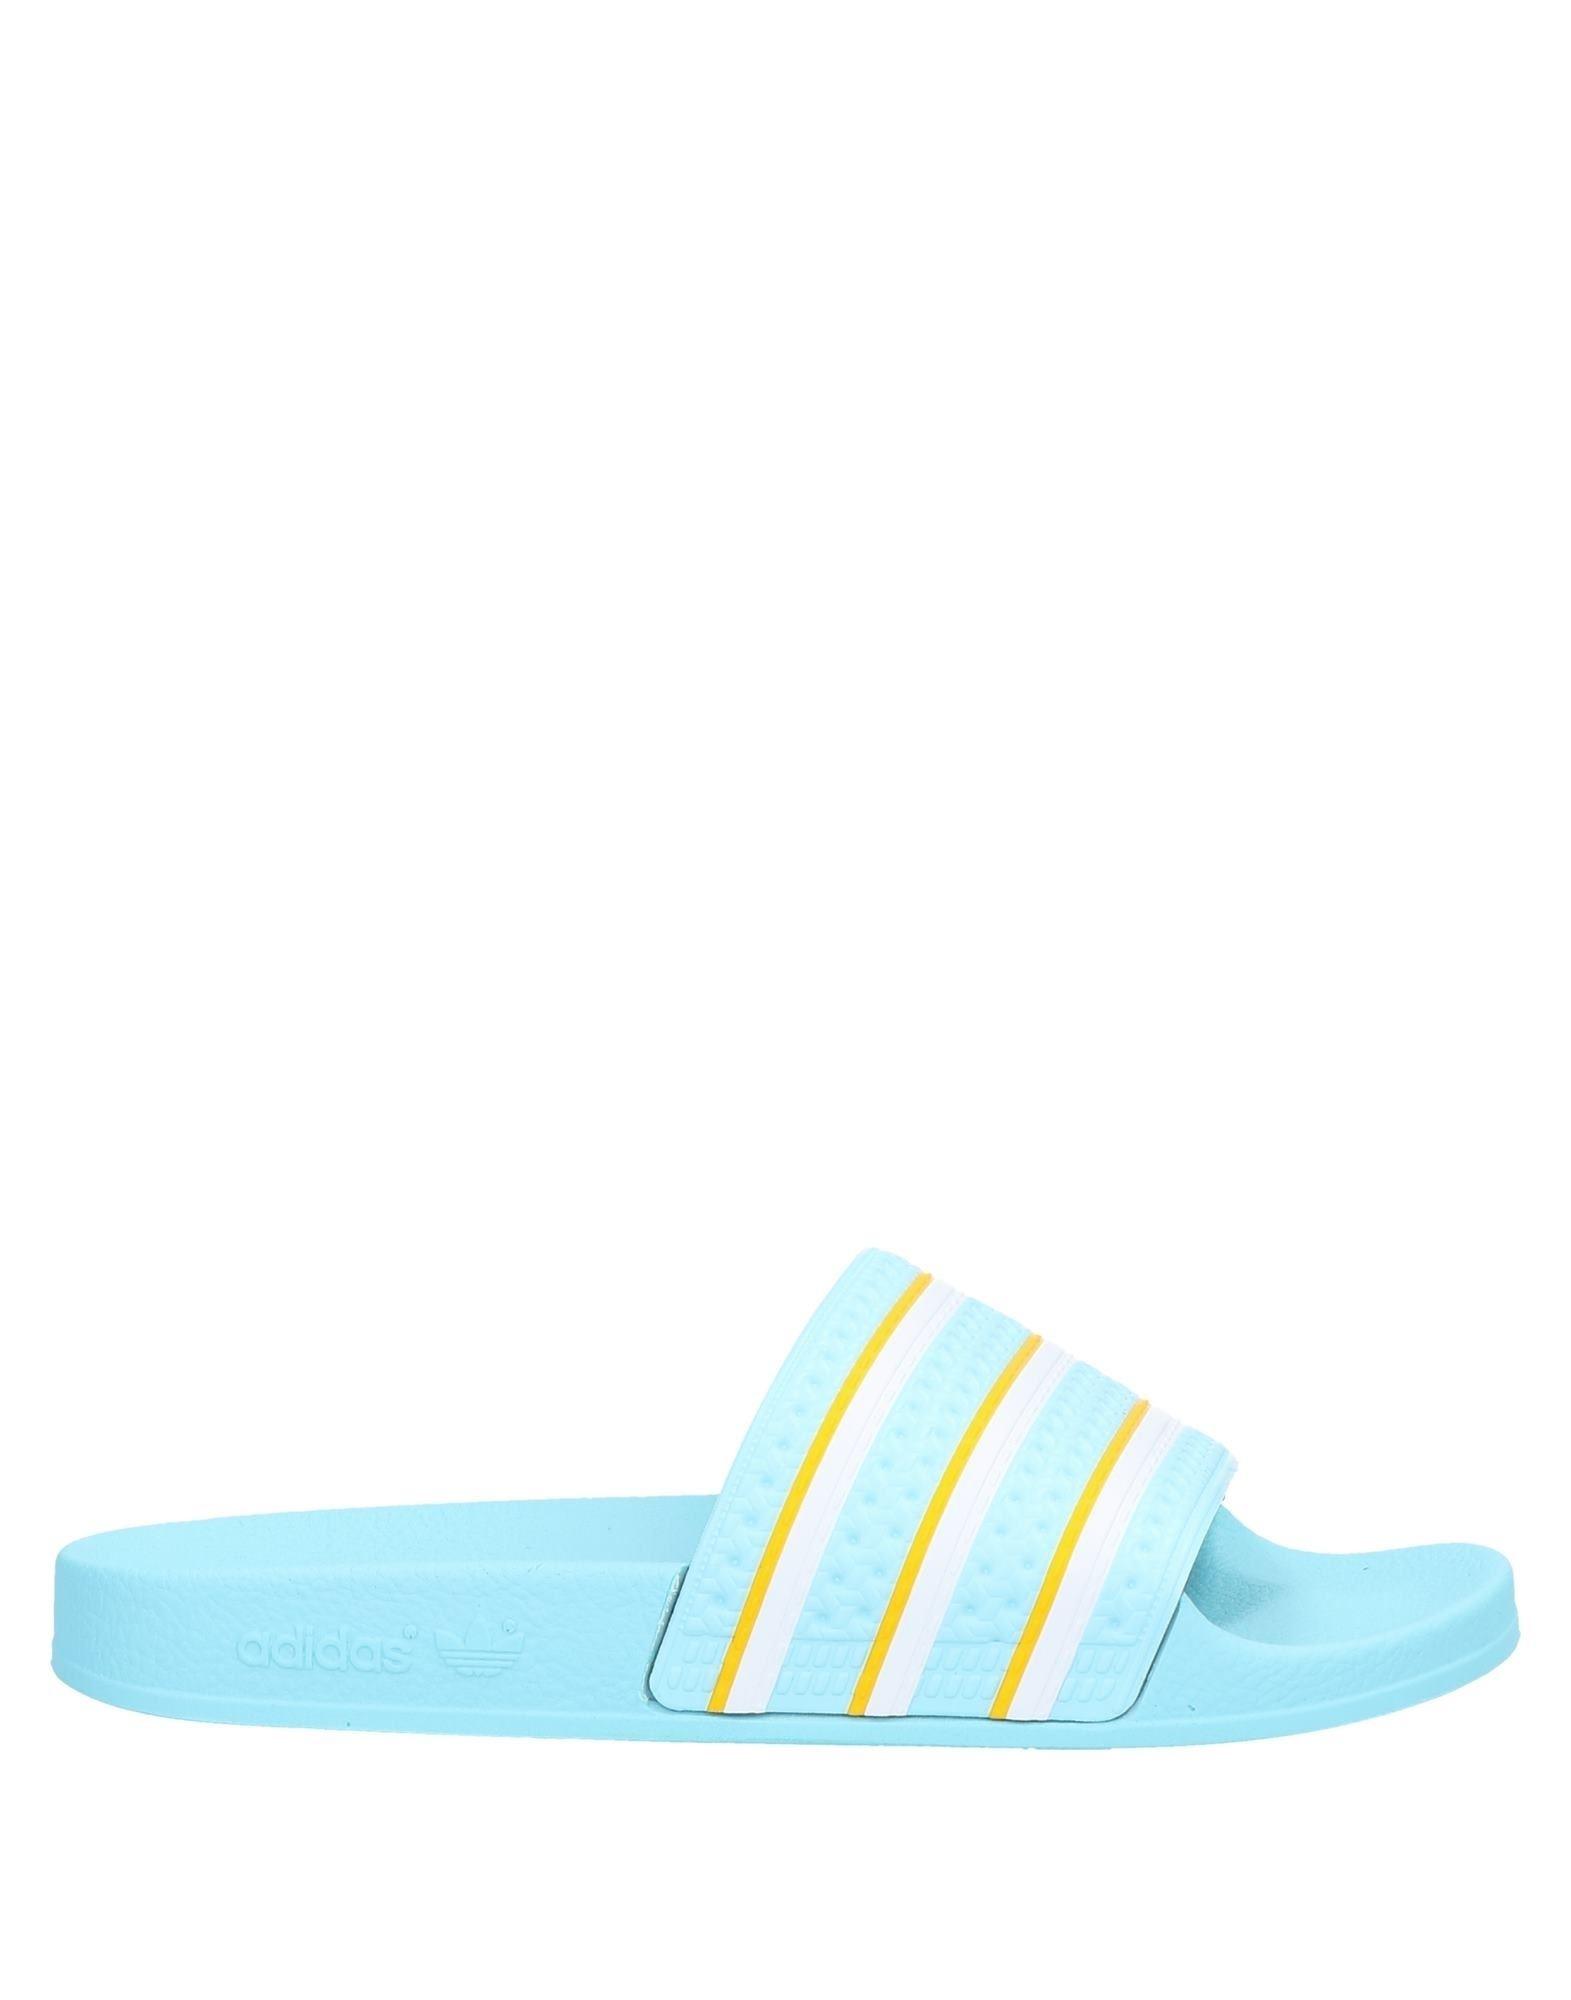 adidas Originals Slippers in Turquoise (Blue) for Men - Lyst